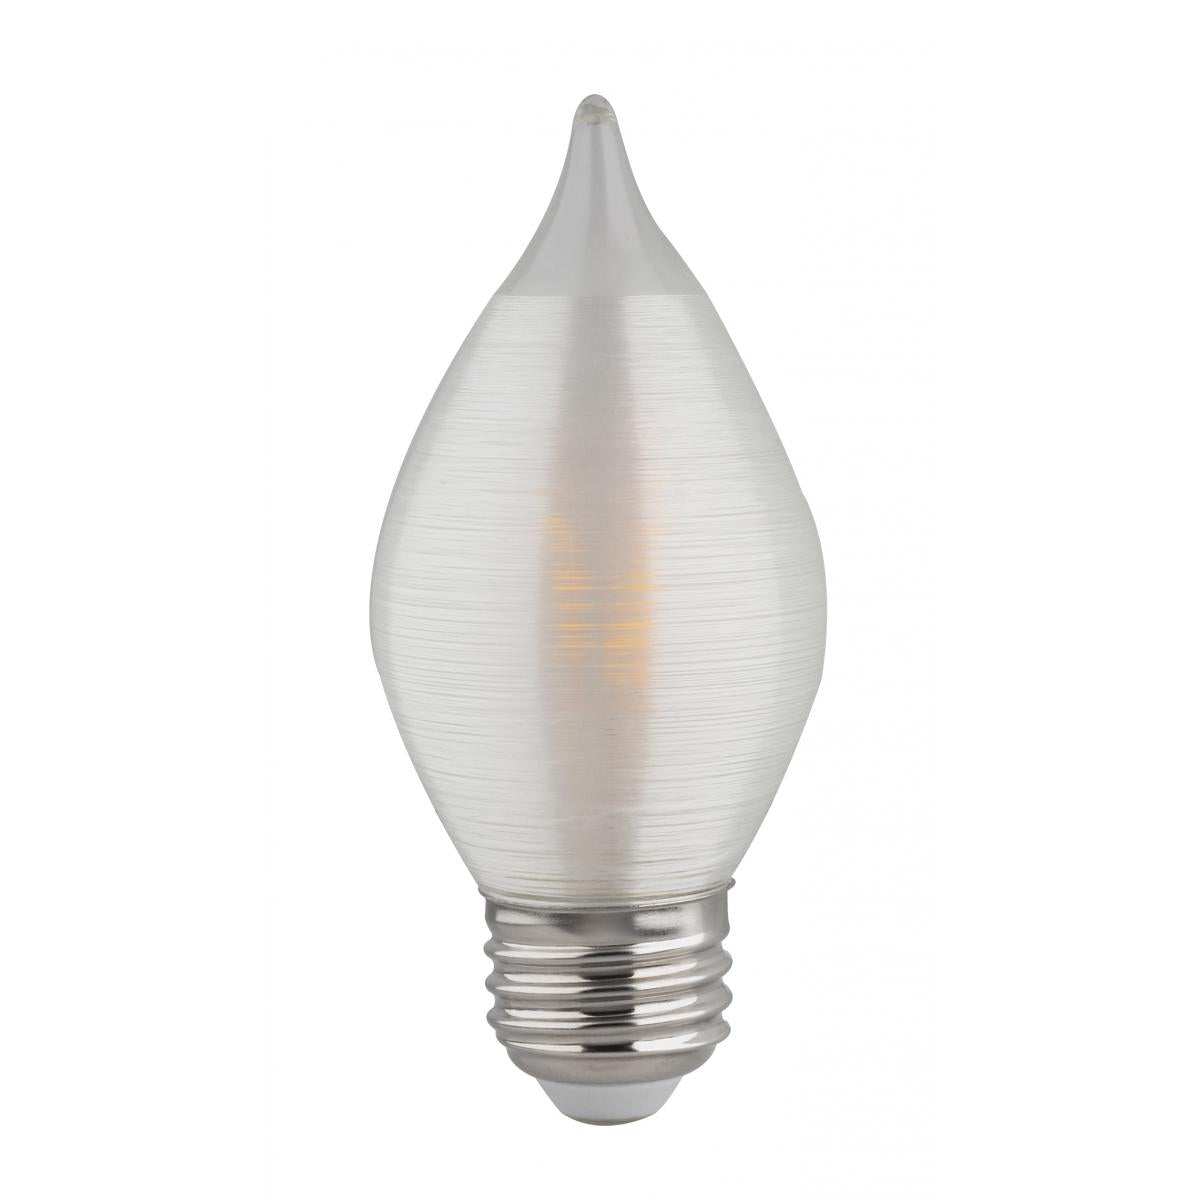 Replacement for Satco S2715 60W 120V C15 Satin Spun E26 Base Incandescent - NOW LED S22713